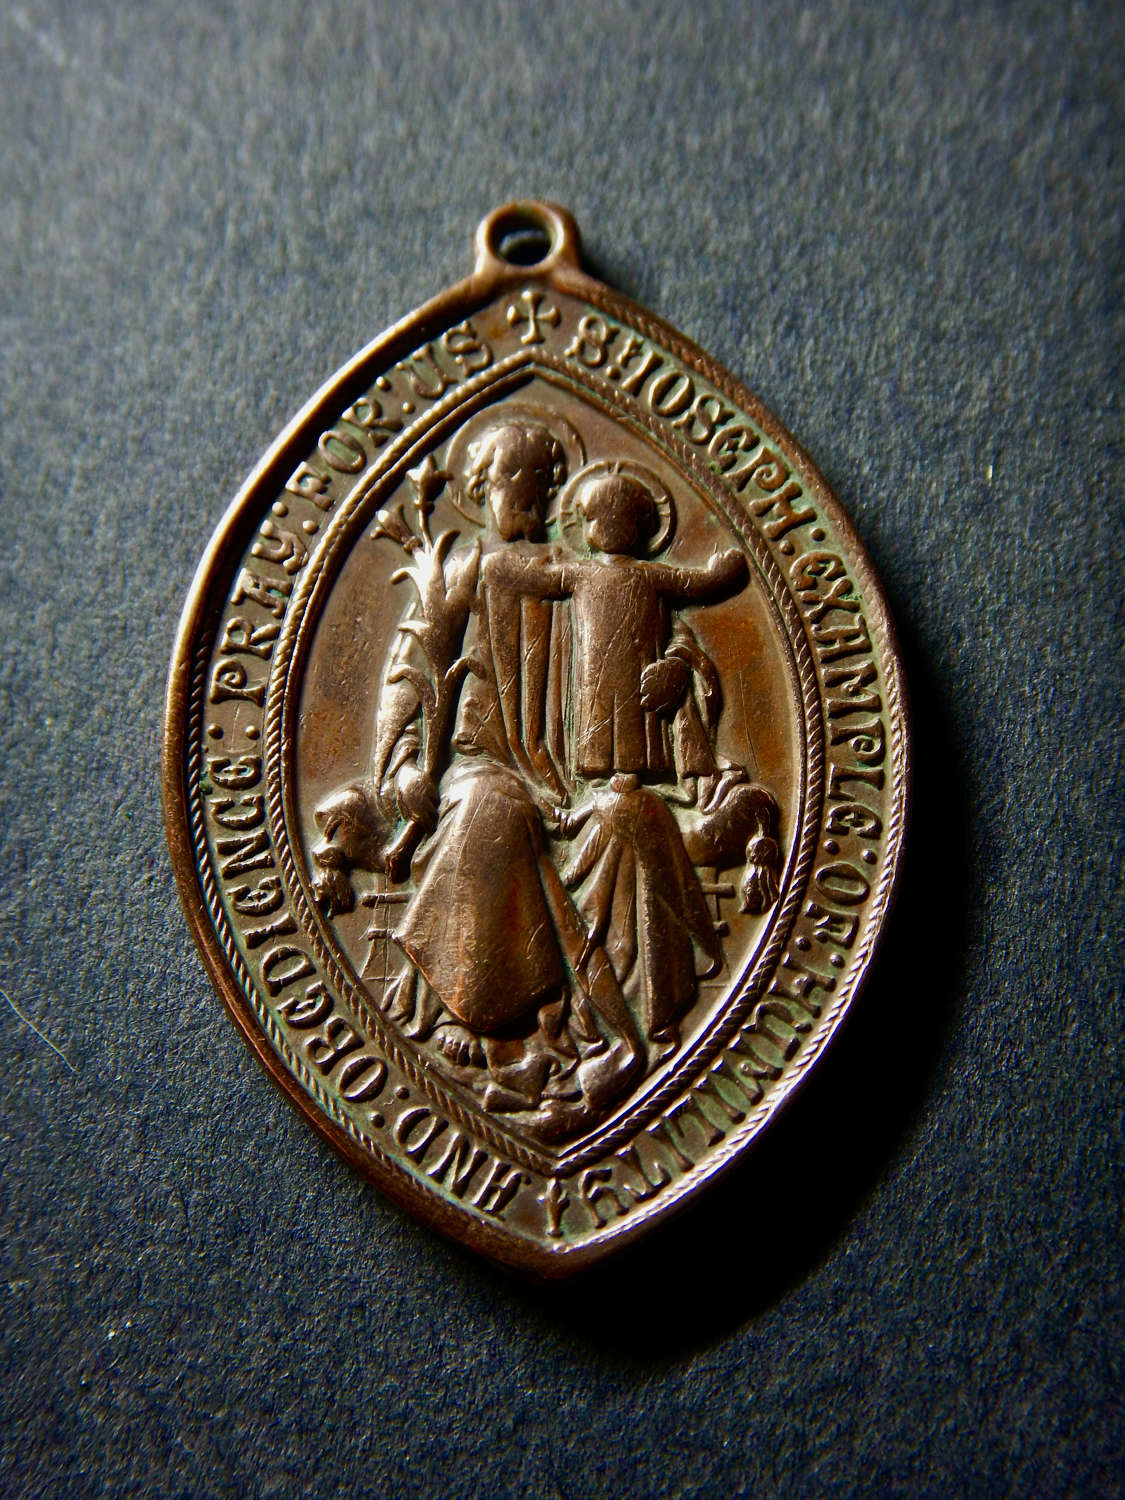 Unusually large copper Virgin Mary and St Joseph medal - O Mary